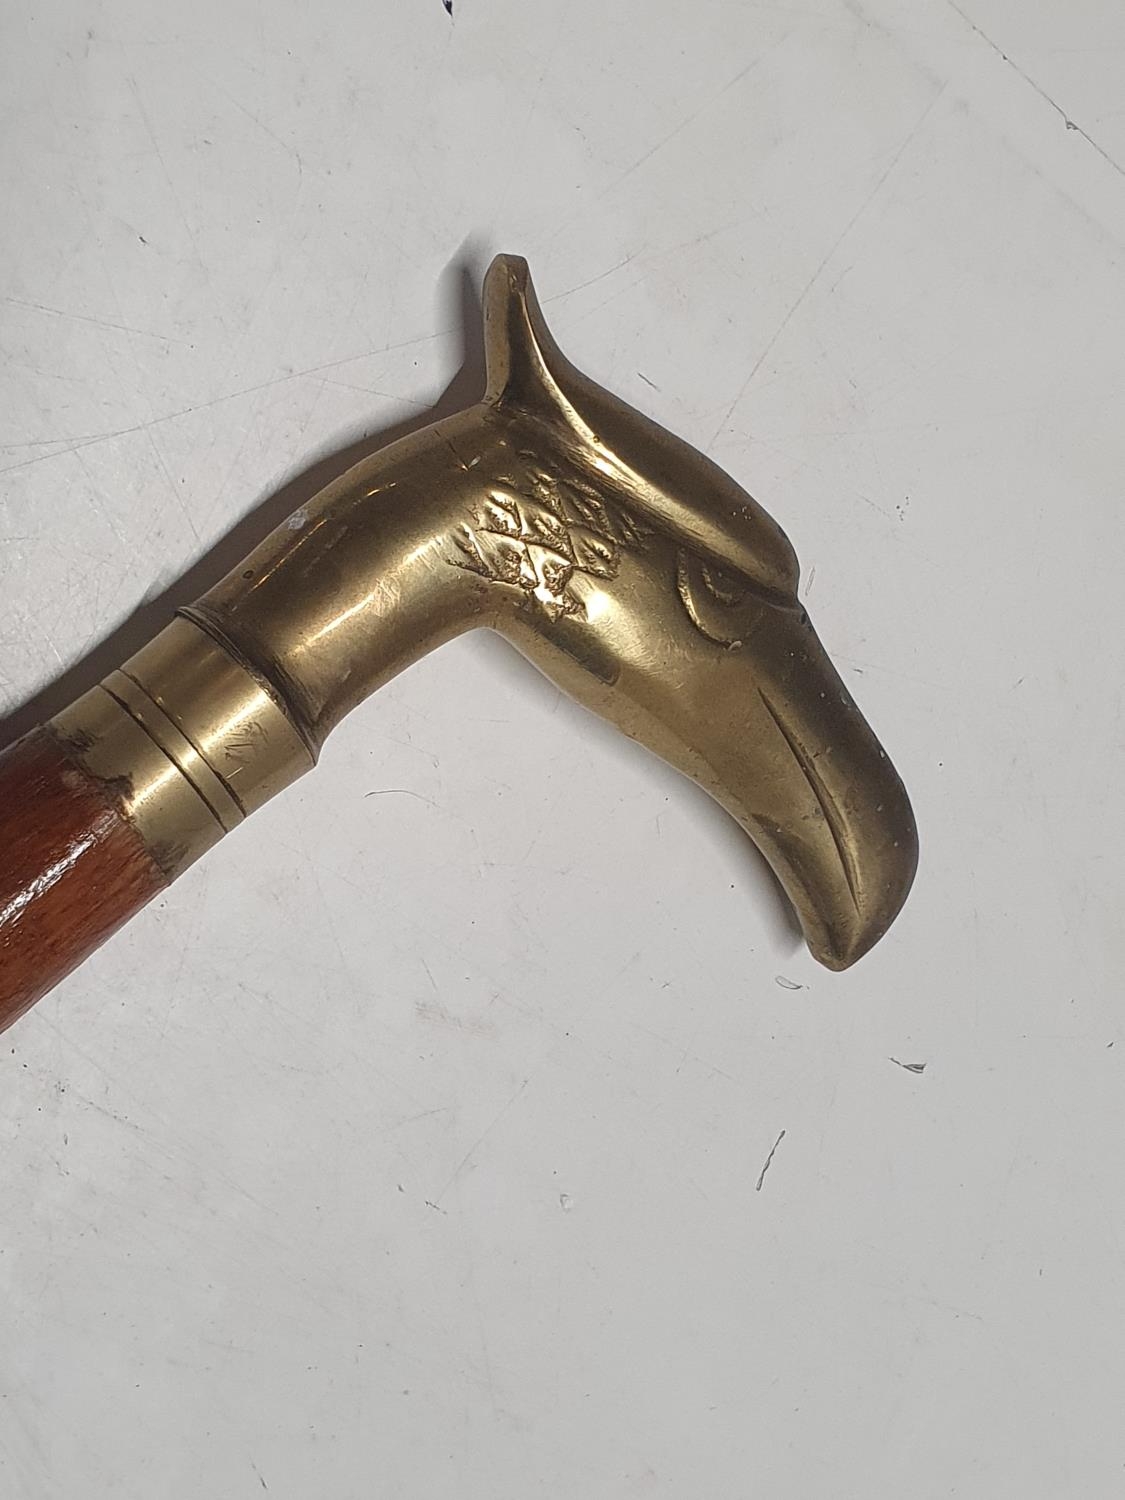 A brass topped walking cane. Shipping unavailable - Image 3 of 3